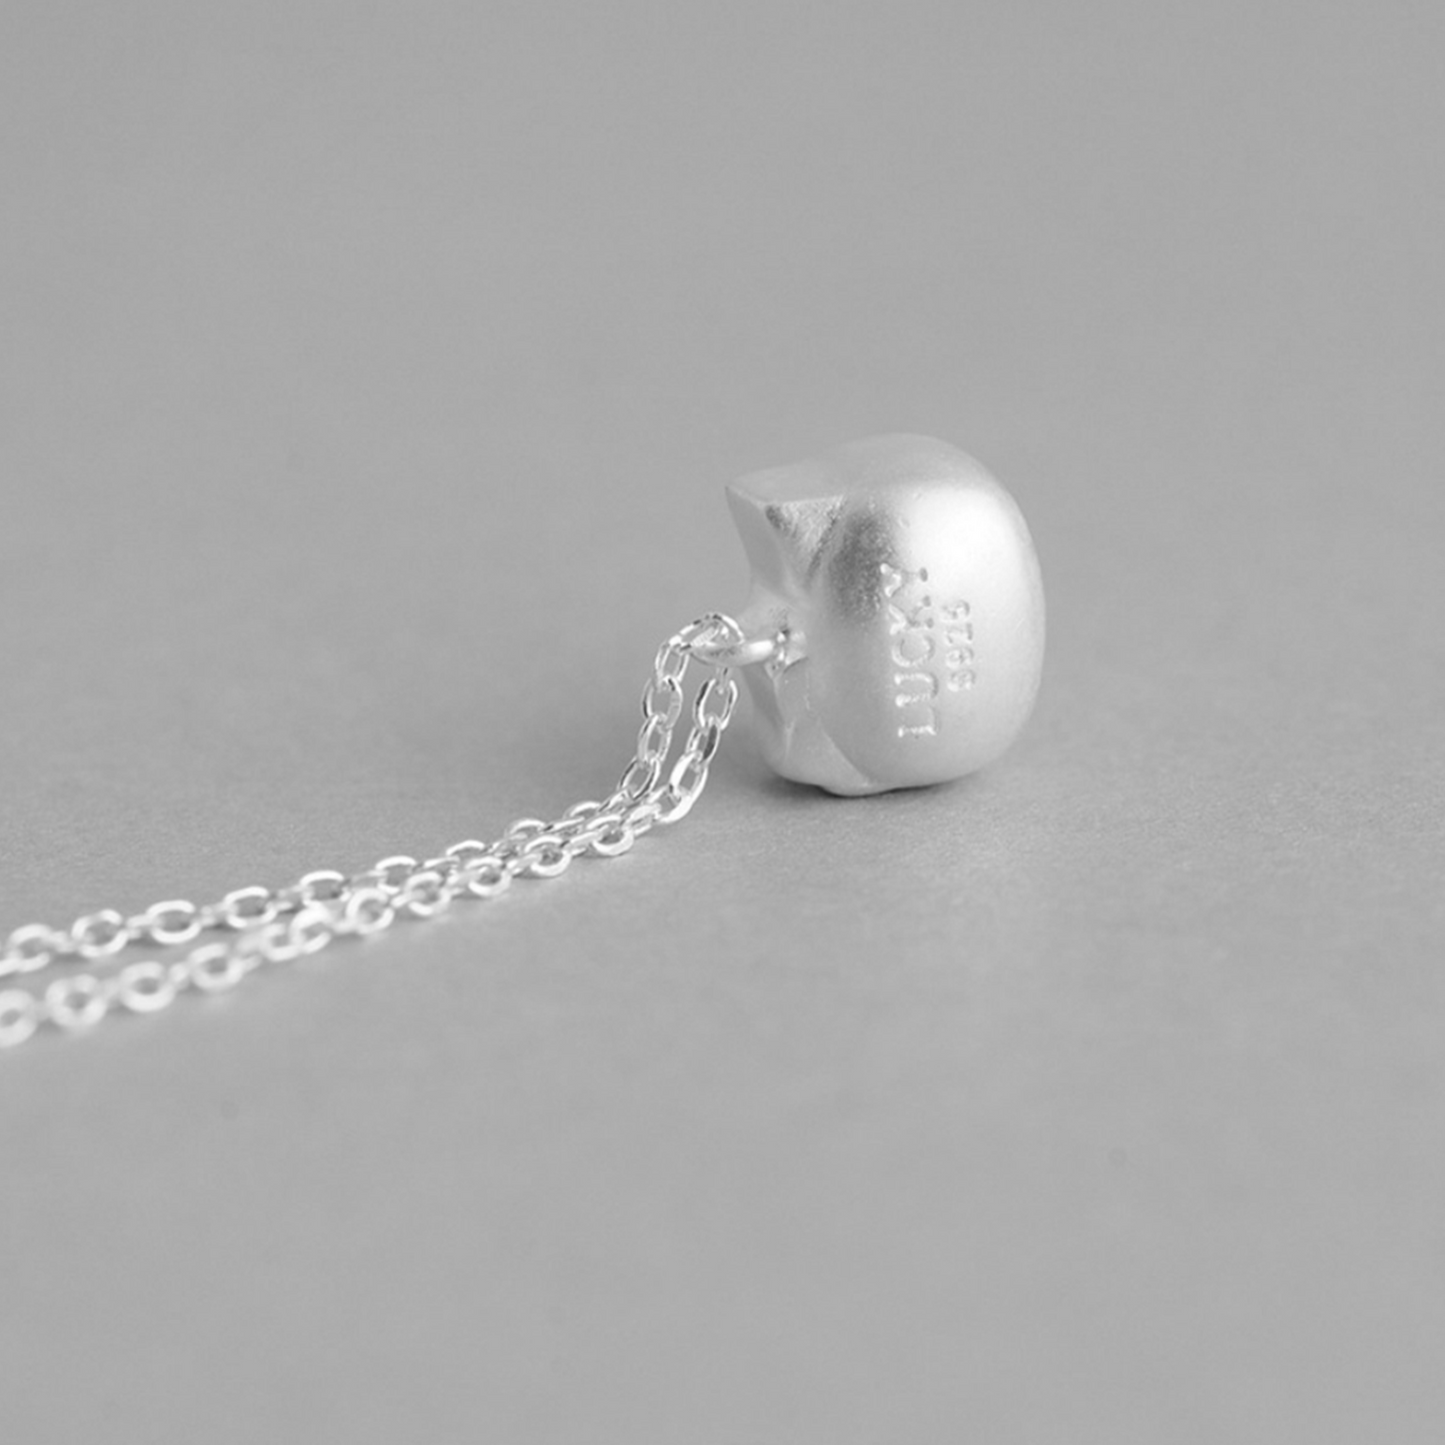 Sterling Silver Hello Kitty Necklace with Jingle Bell Charm - sugarkittenlondon